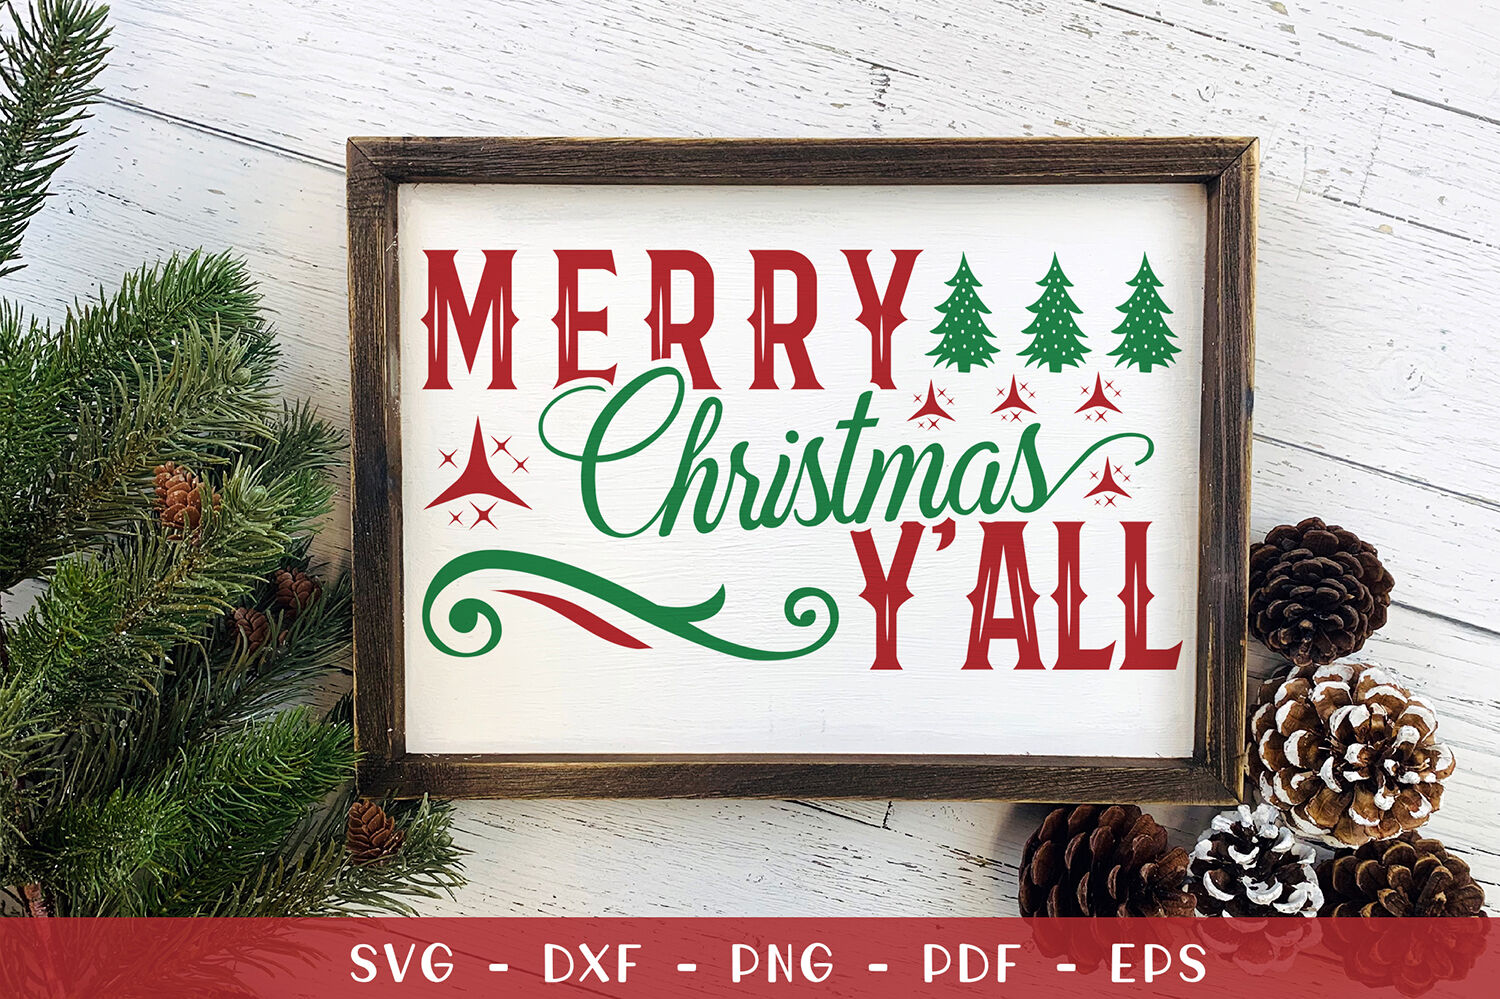 Download Merry Christmas Y All Christmas Sign Svg Cut File By Craftlabsvg Thehungryjpeg Com